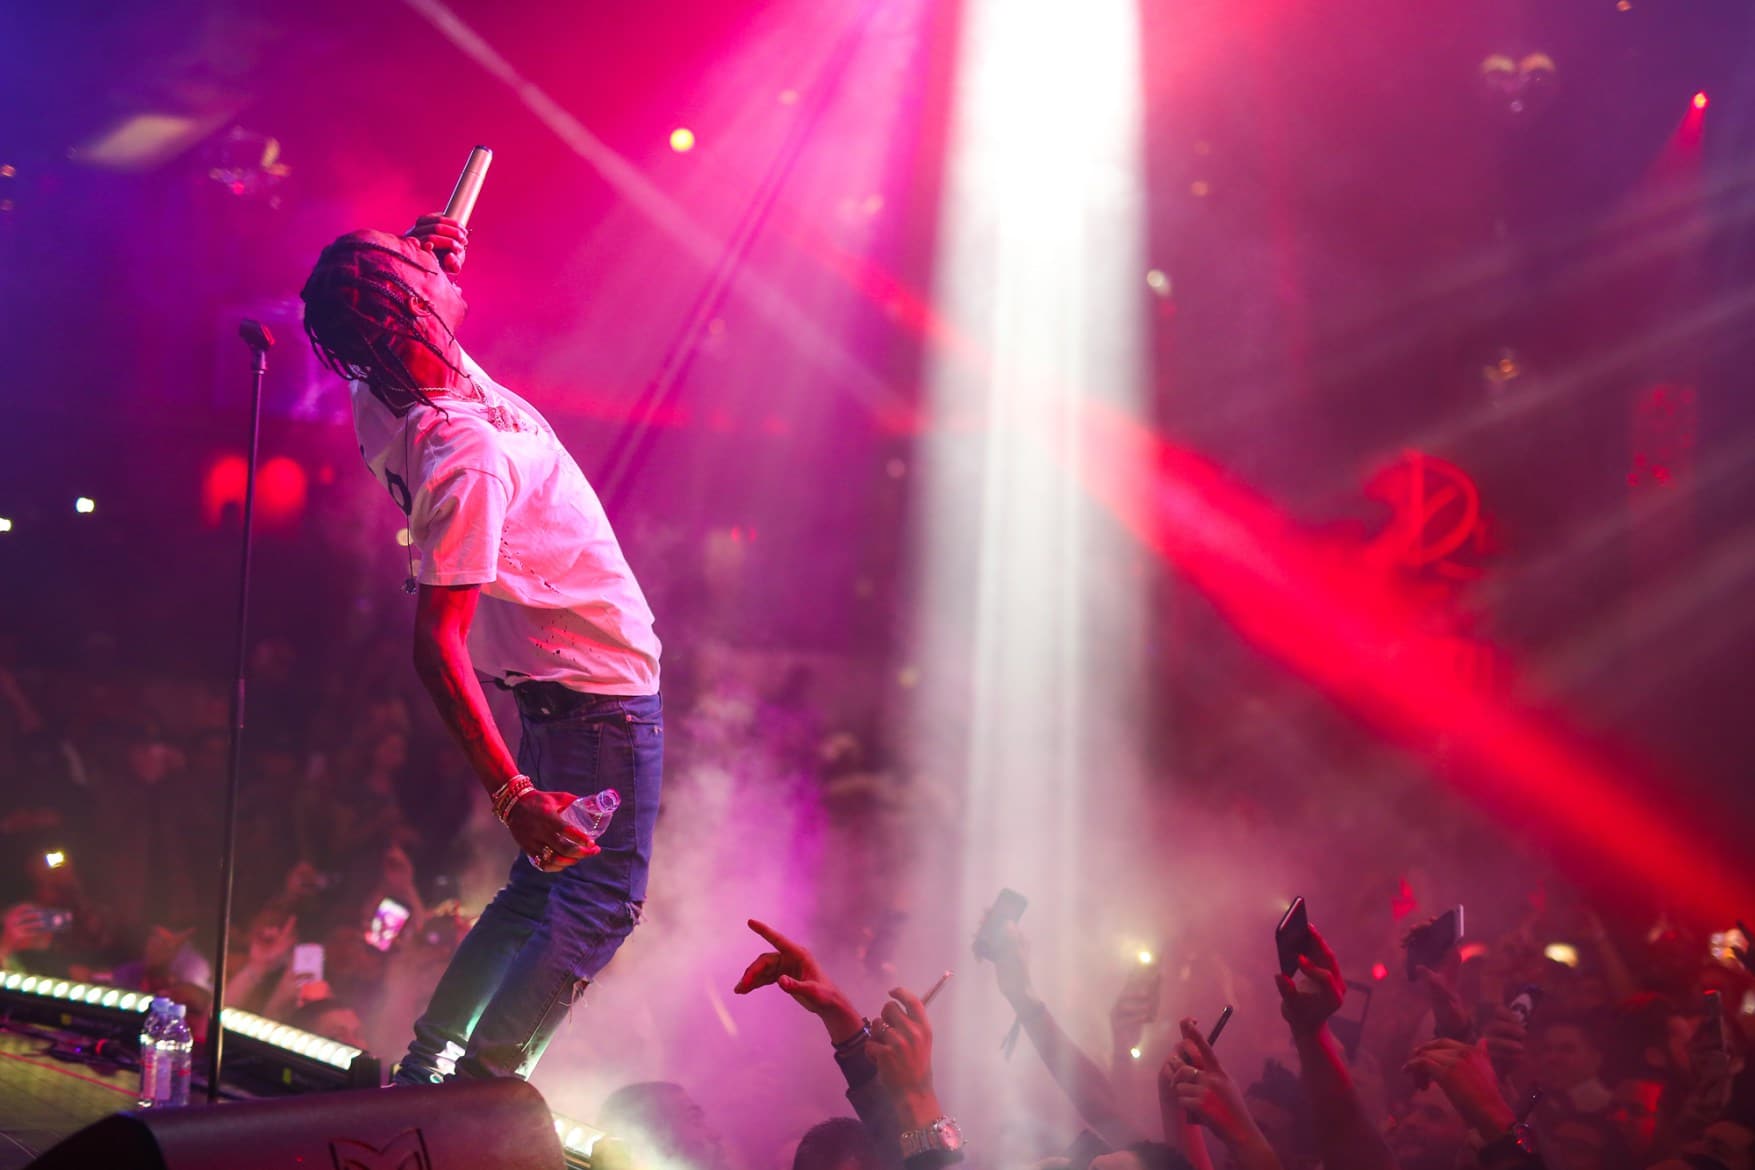 The Nightshow (LIVE in Ottawa, Canada) ft. Travis Scott & Guests – Nilsen Report (Photo : hypebeast)